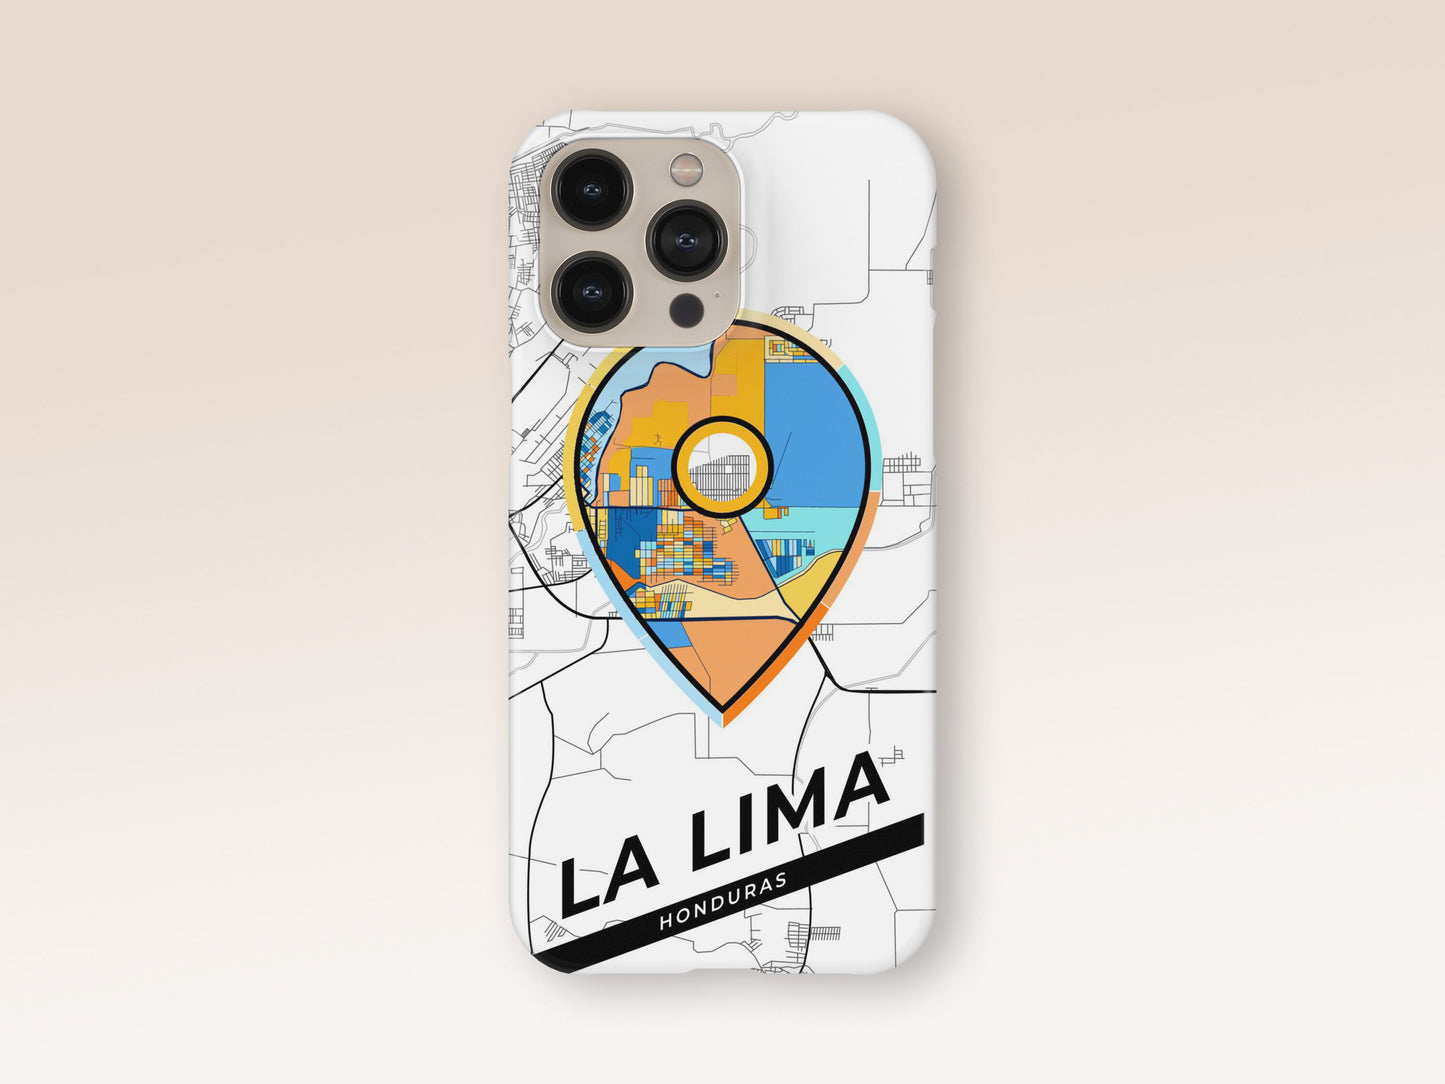 La Lima Honduras slim phone case with colorful icon. Birthday, wedding or housewarming gift. Couple match cases. 1